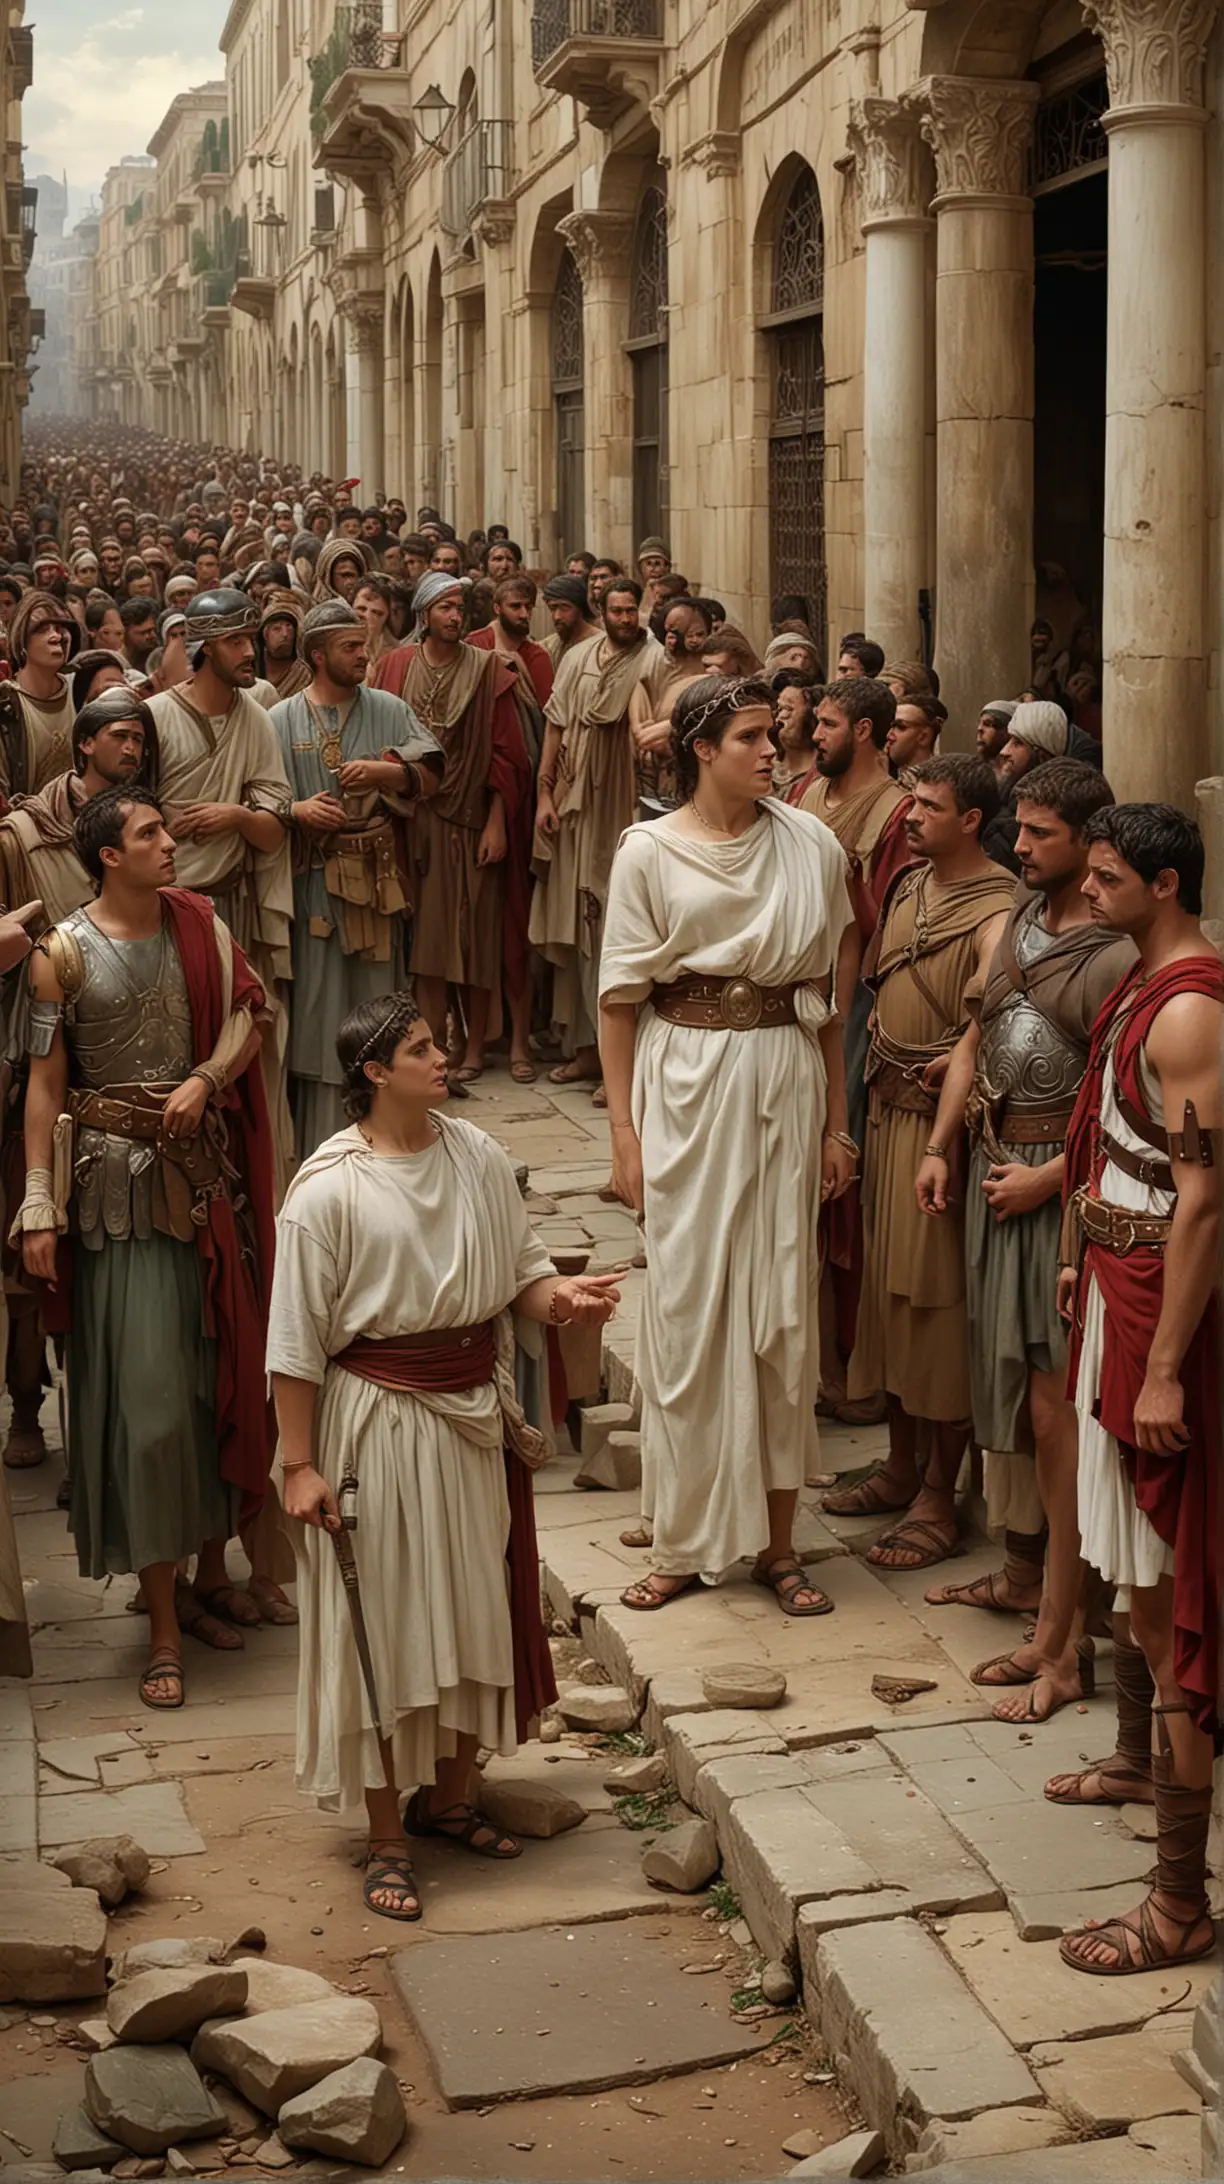 Conflict with Religious Authorities: A tense scene showing Hypatia in a heated discussion with Christian authorities or a portrayal of growing tension in the streets of Alexandria. Roman soldiers and officials are present, indicating the political climate of the Roman Empire.